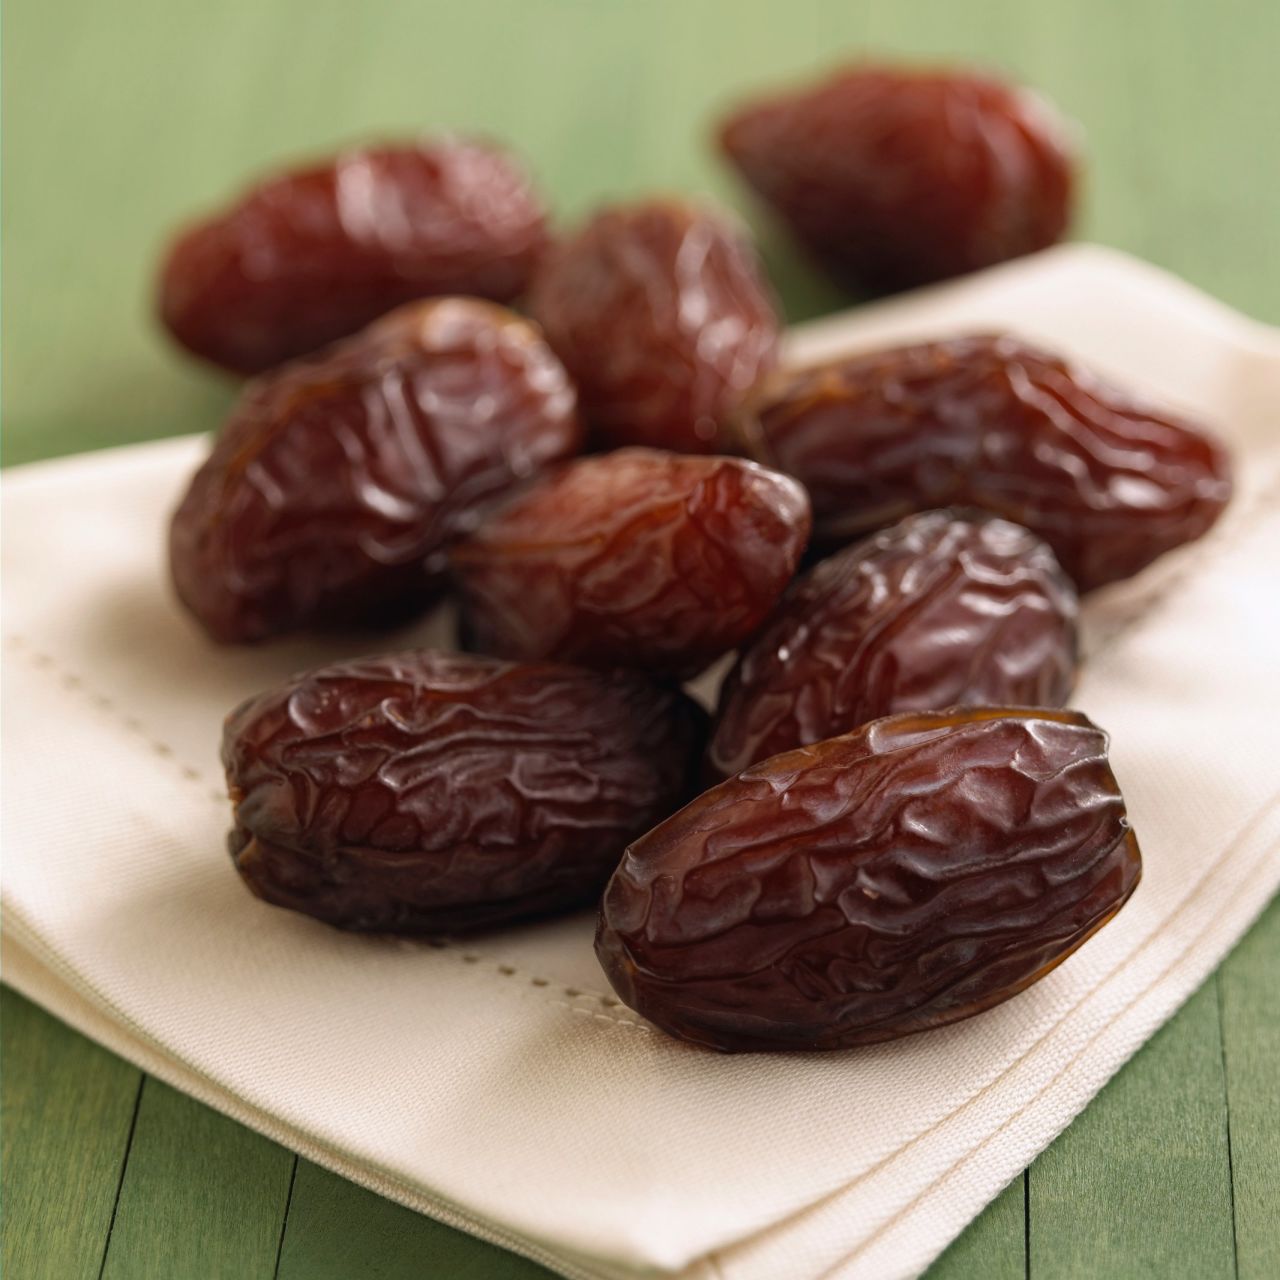 <strong>Dates:</strong> This Middle Eastern favorite is a sweet fruit that is perfect braised in stews, chopped up in desserts or stuffed with cream cheese or almonds. <br /><br />Health benefits include <br />• Low in fat <br />• Good source of fiber <br />• Good source of potassium <br /><br />Harvest season: September to December